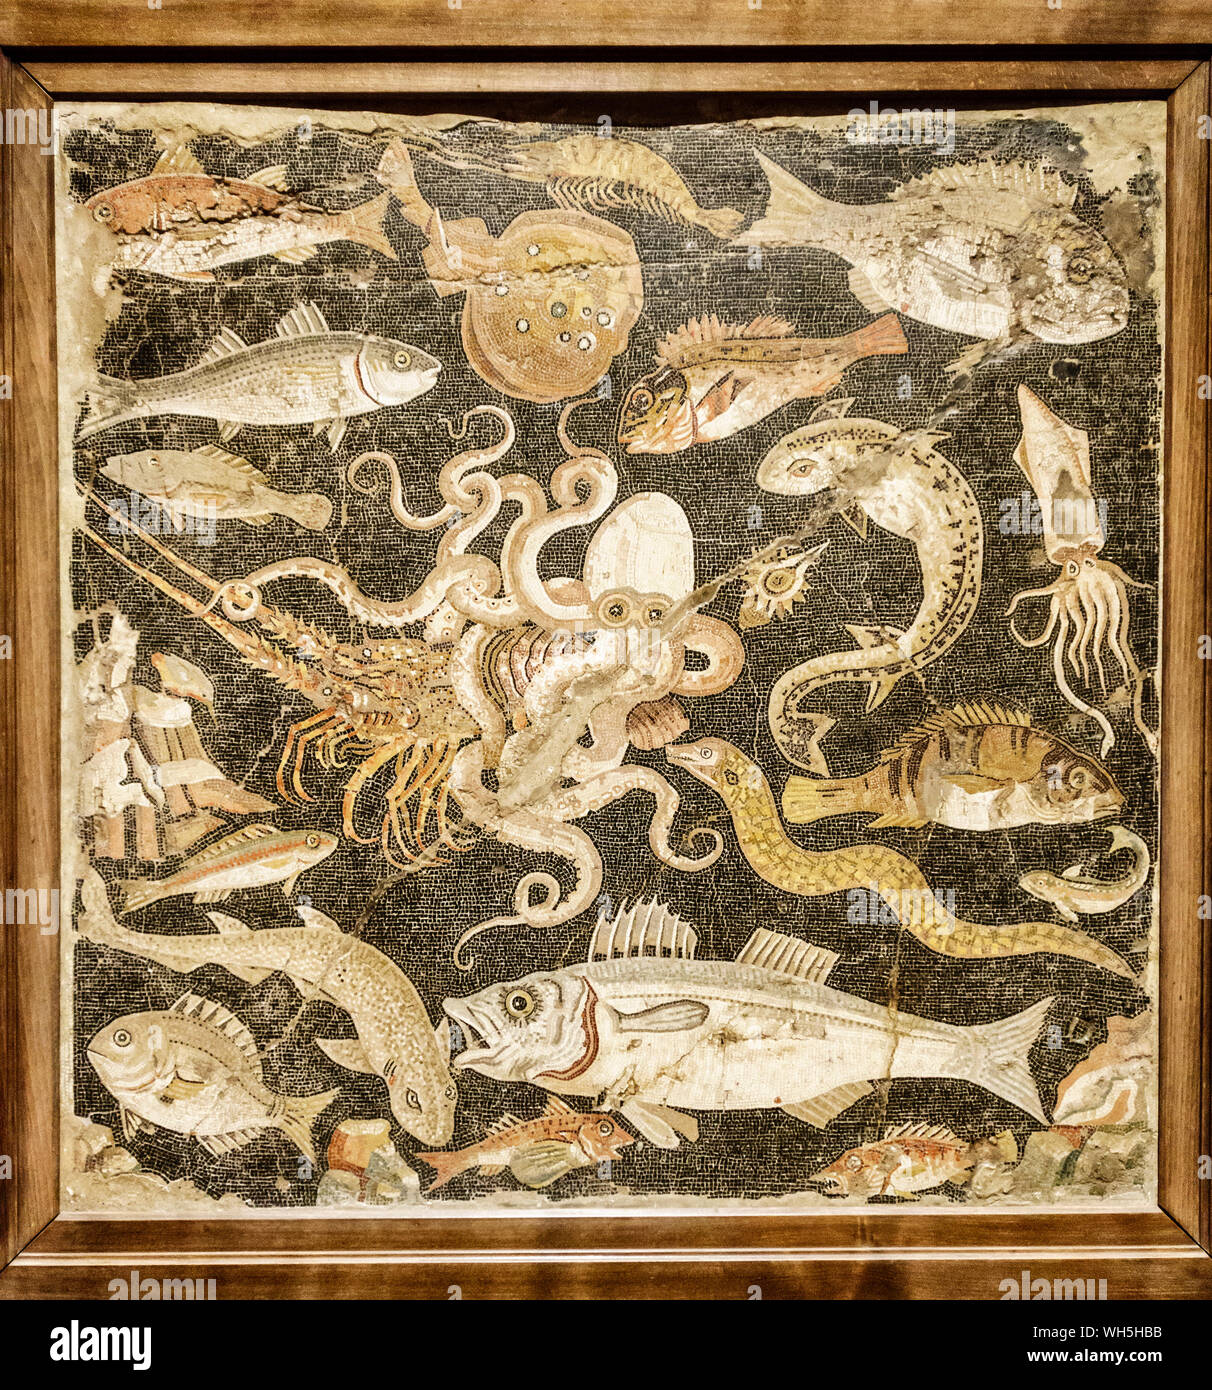 Pompeii, Italy. Mosaic of Mediterranean marine life found in the House of the Faun, now in the National Archaeological Museum of Naples (circa 50BC) Stock Photo